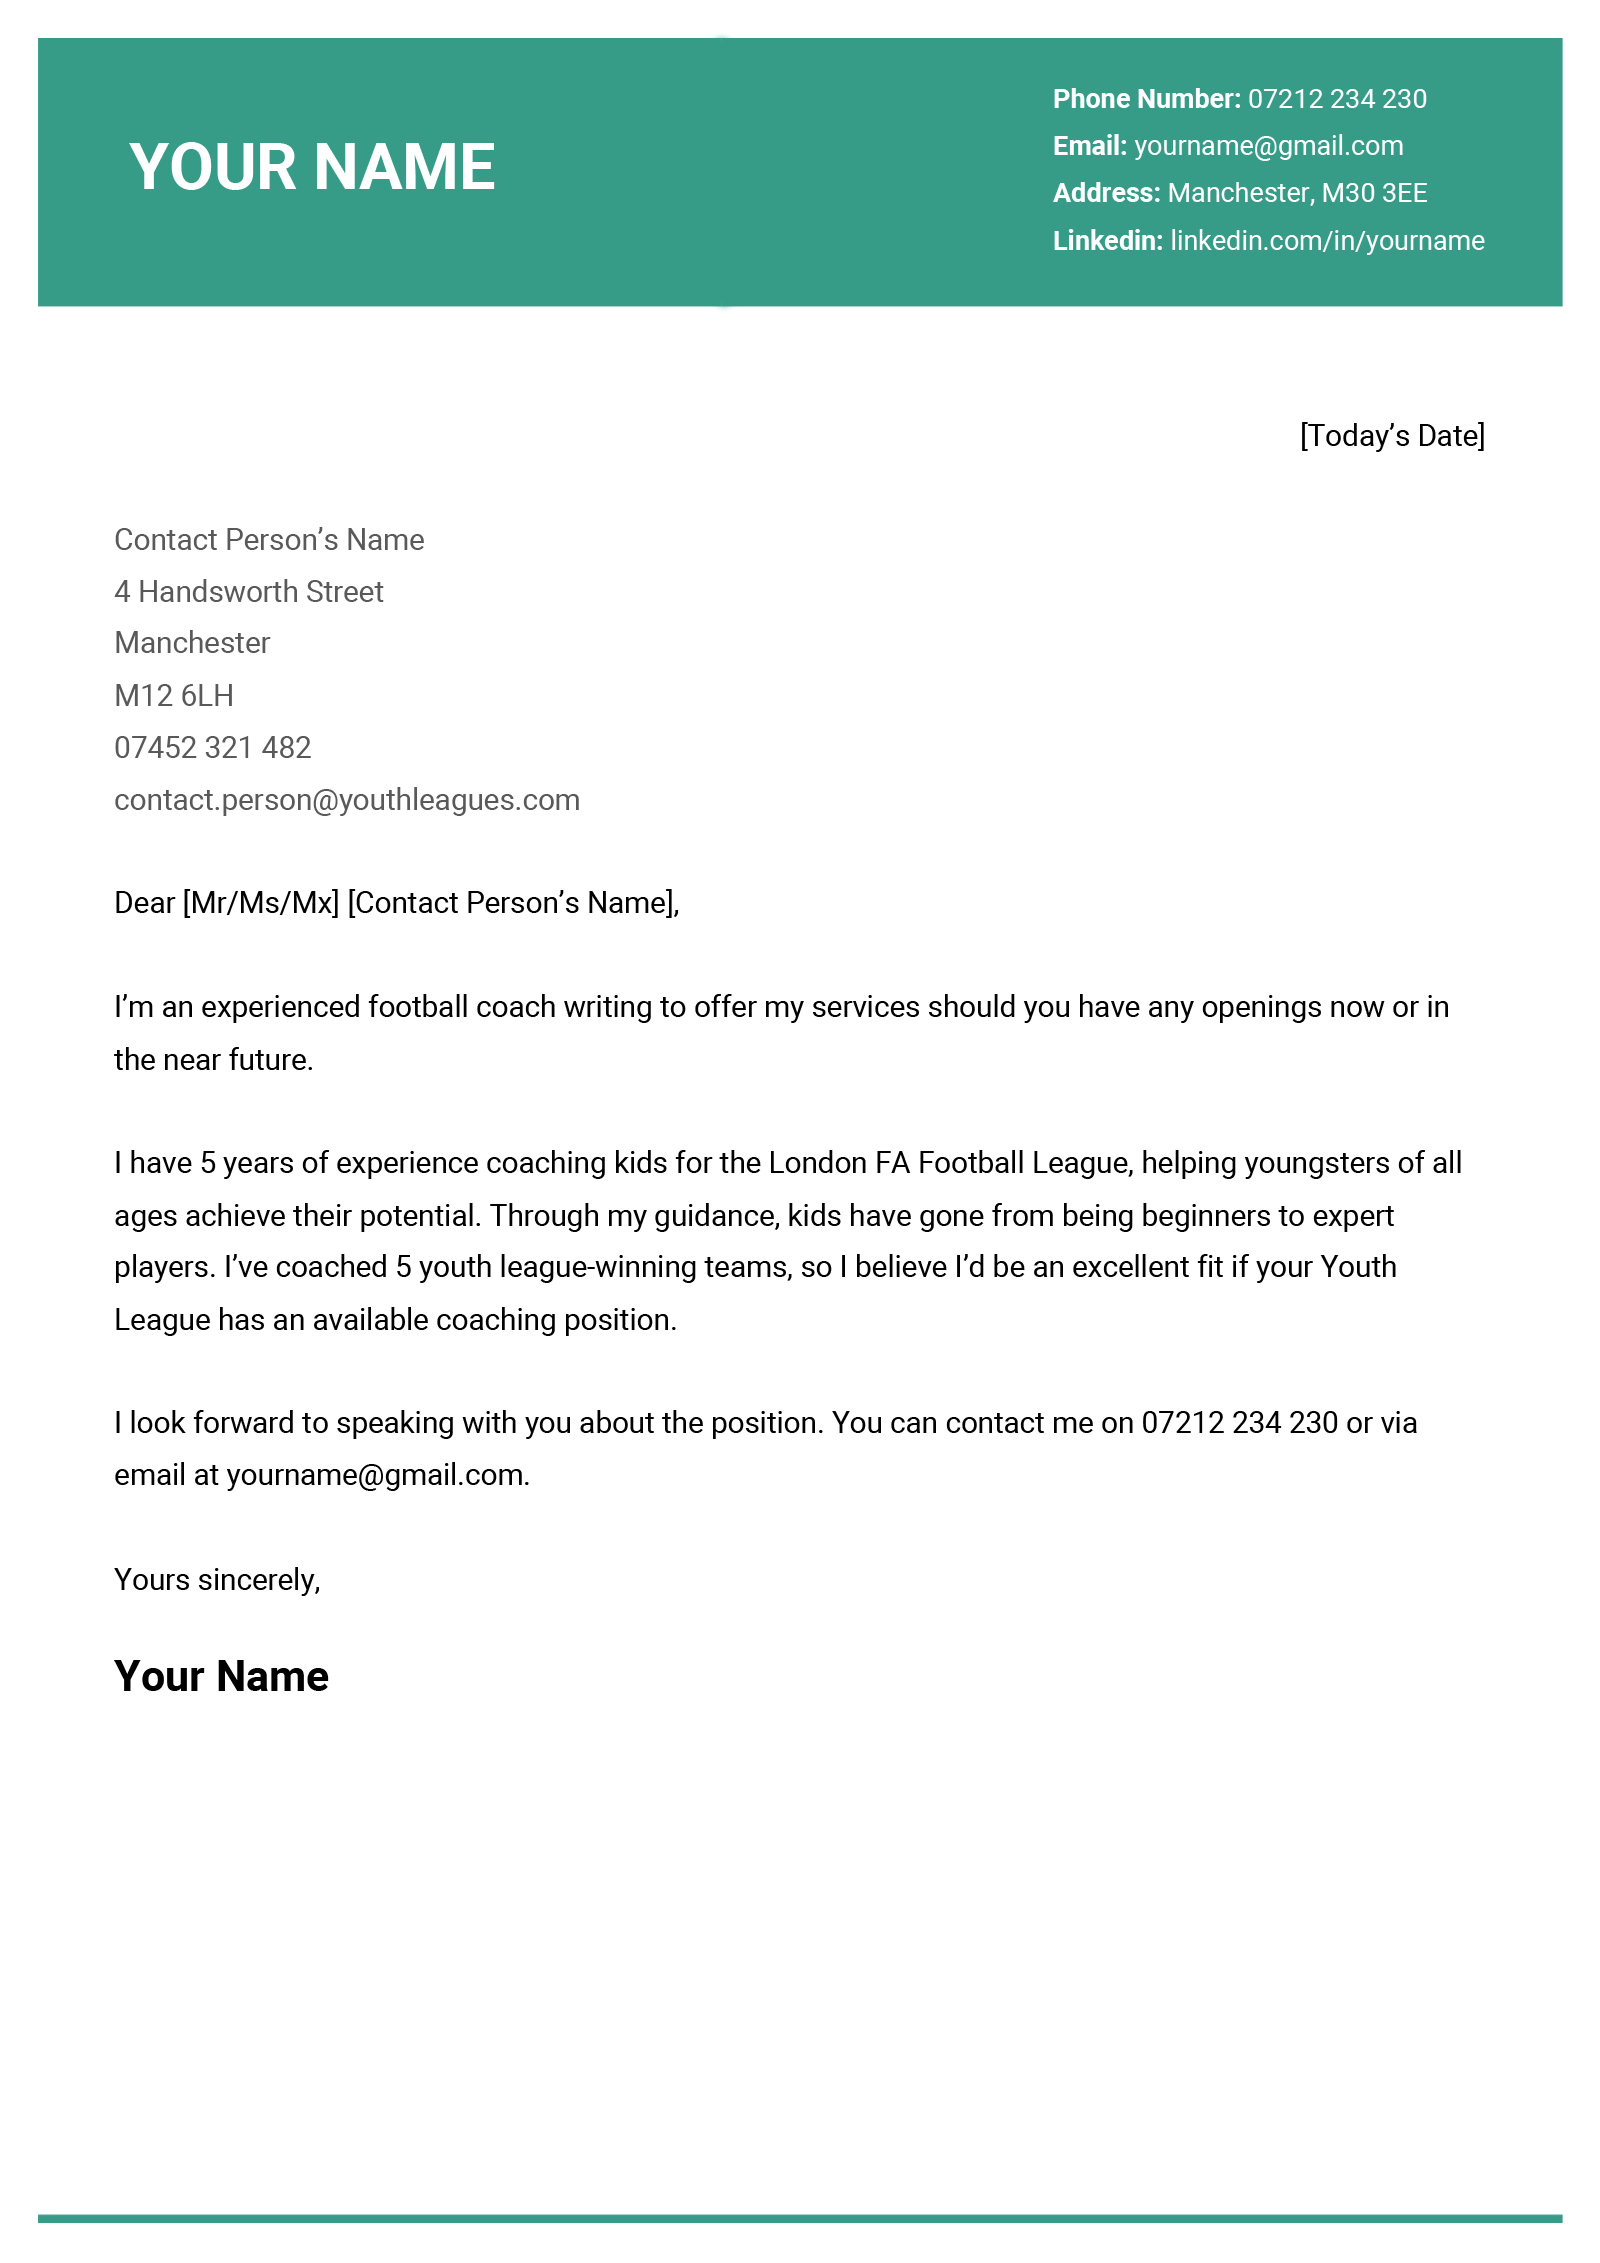 A short cover letter sample with a deep purple header.